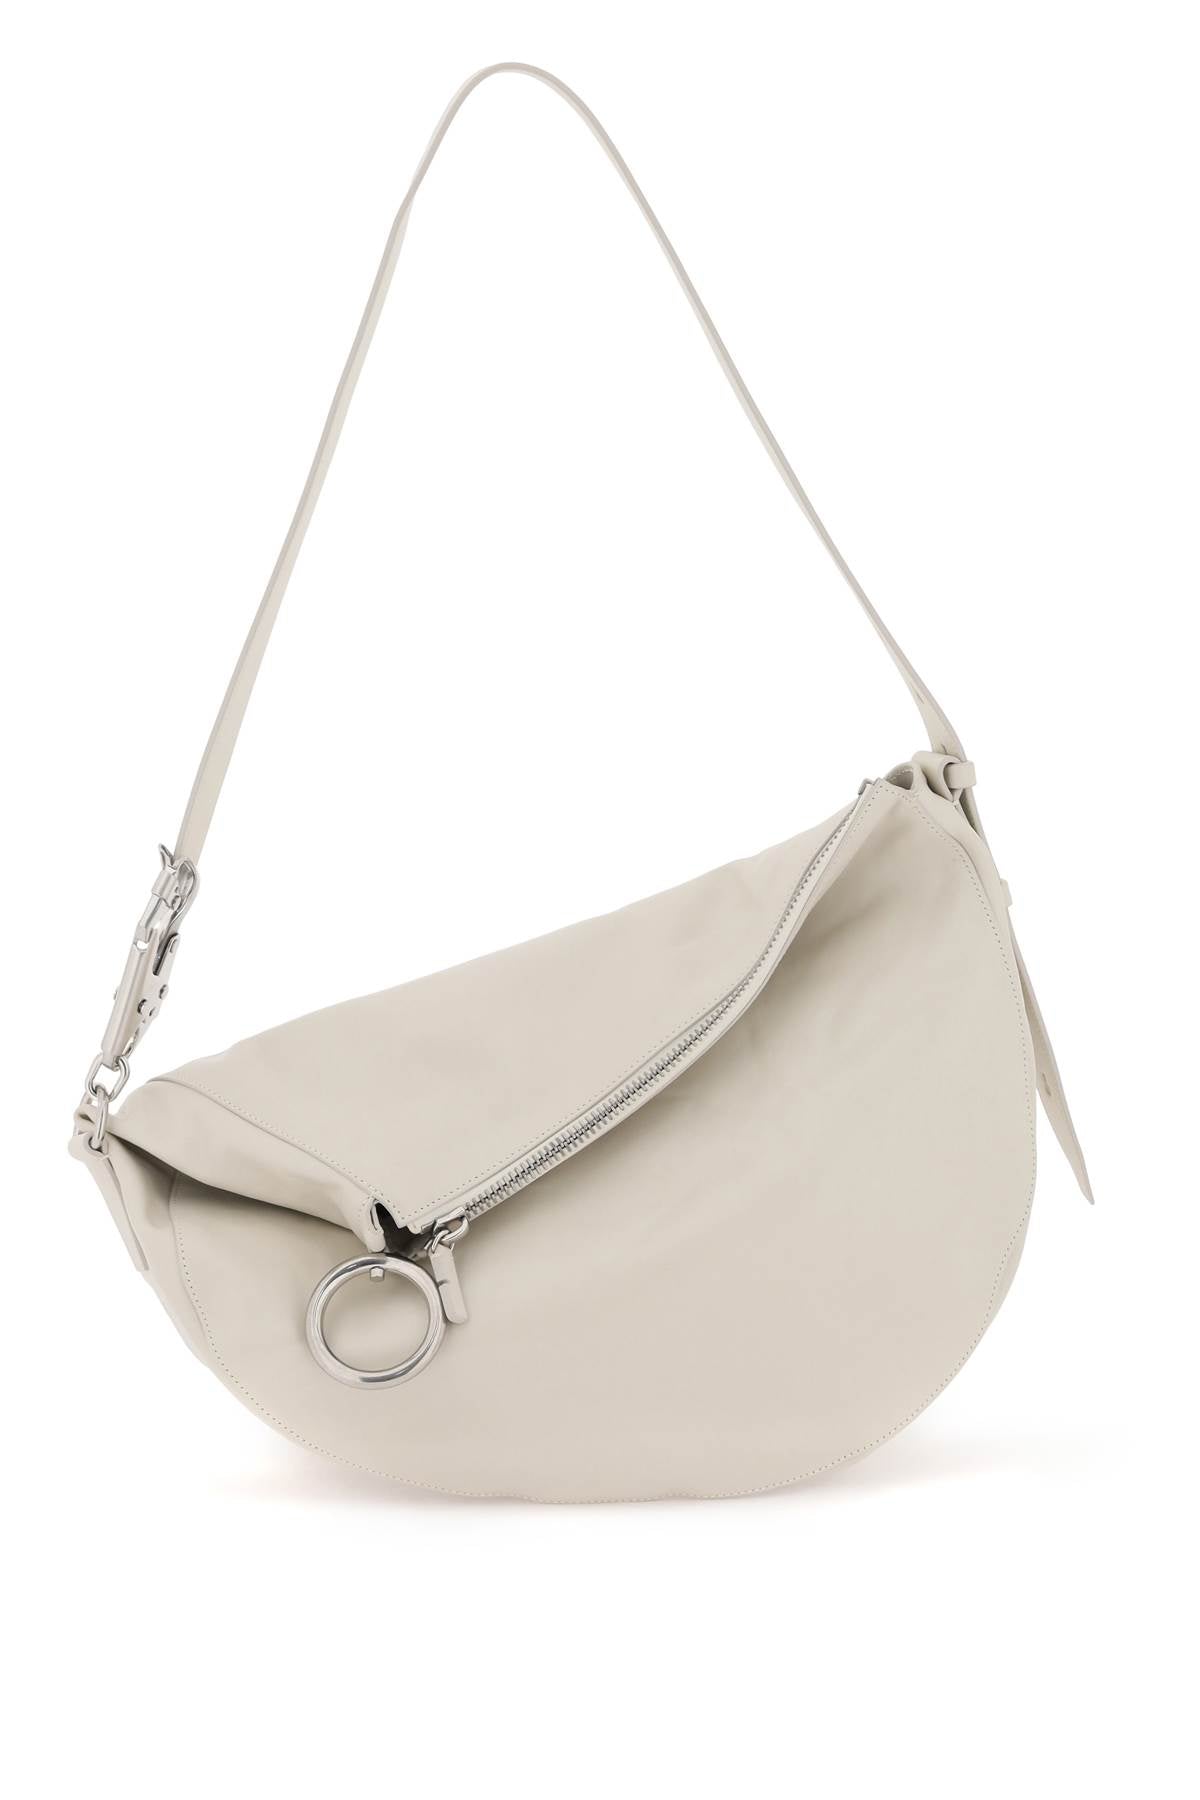 Shop Burberry Medium Knight Handbag In Cream-colored Crinkled Calfskin With Horse-shaped Clip And Hoop In Ivory